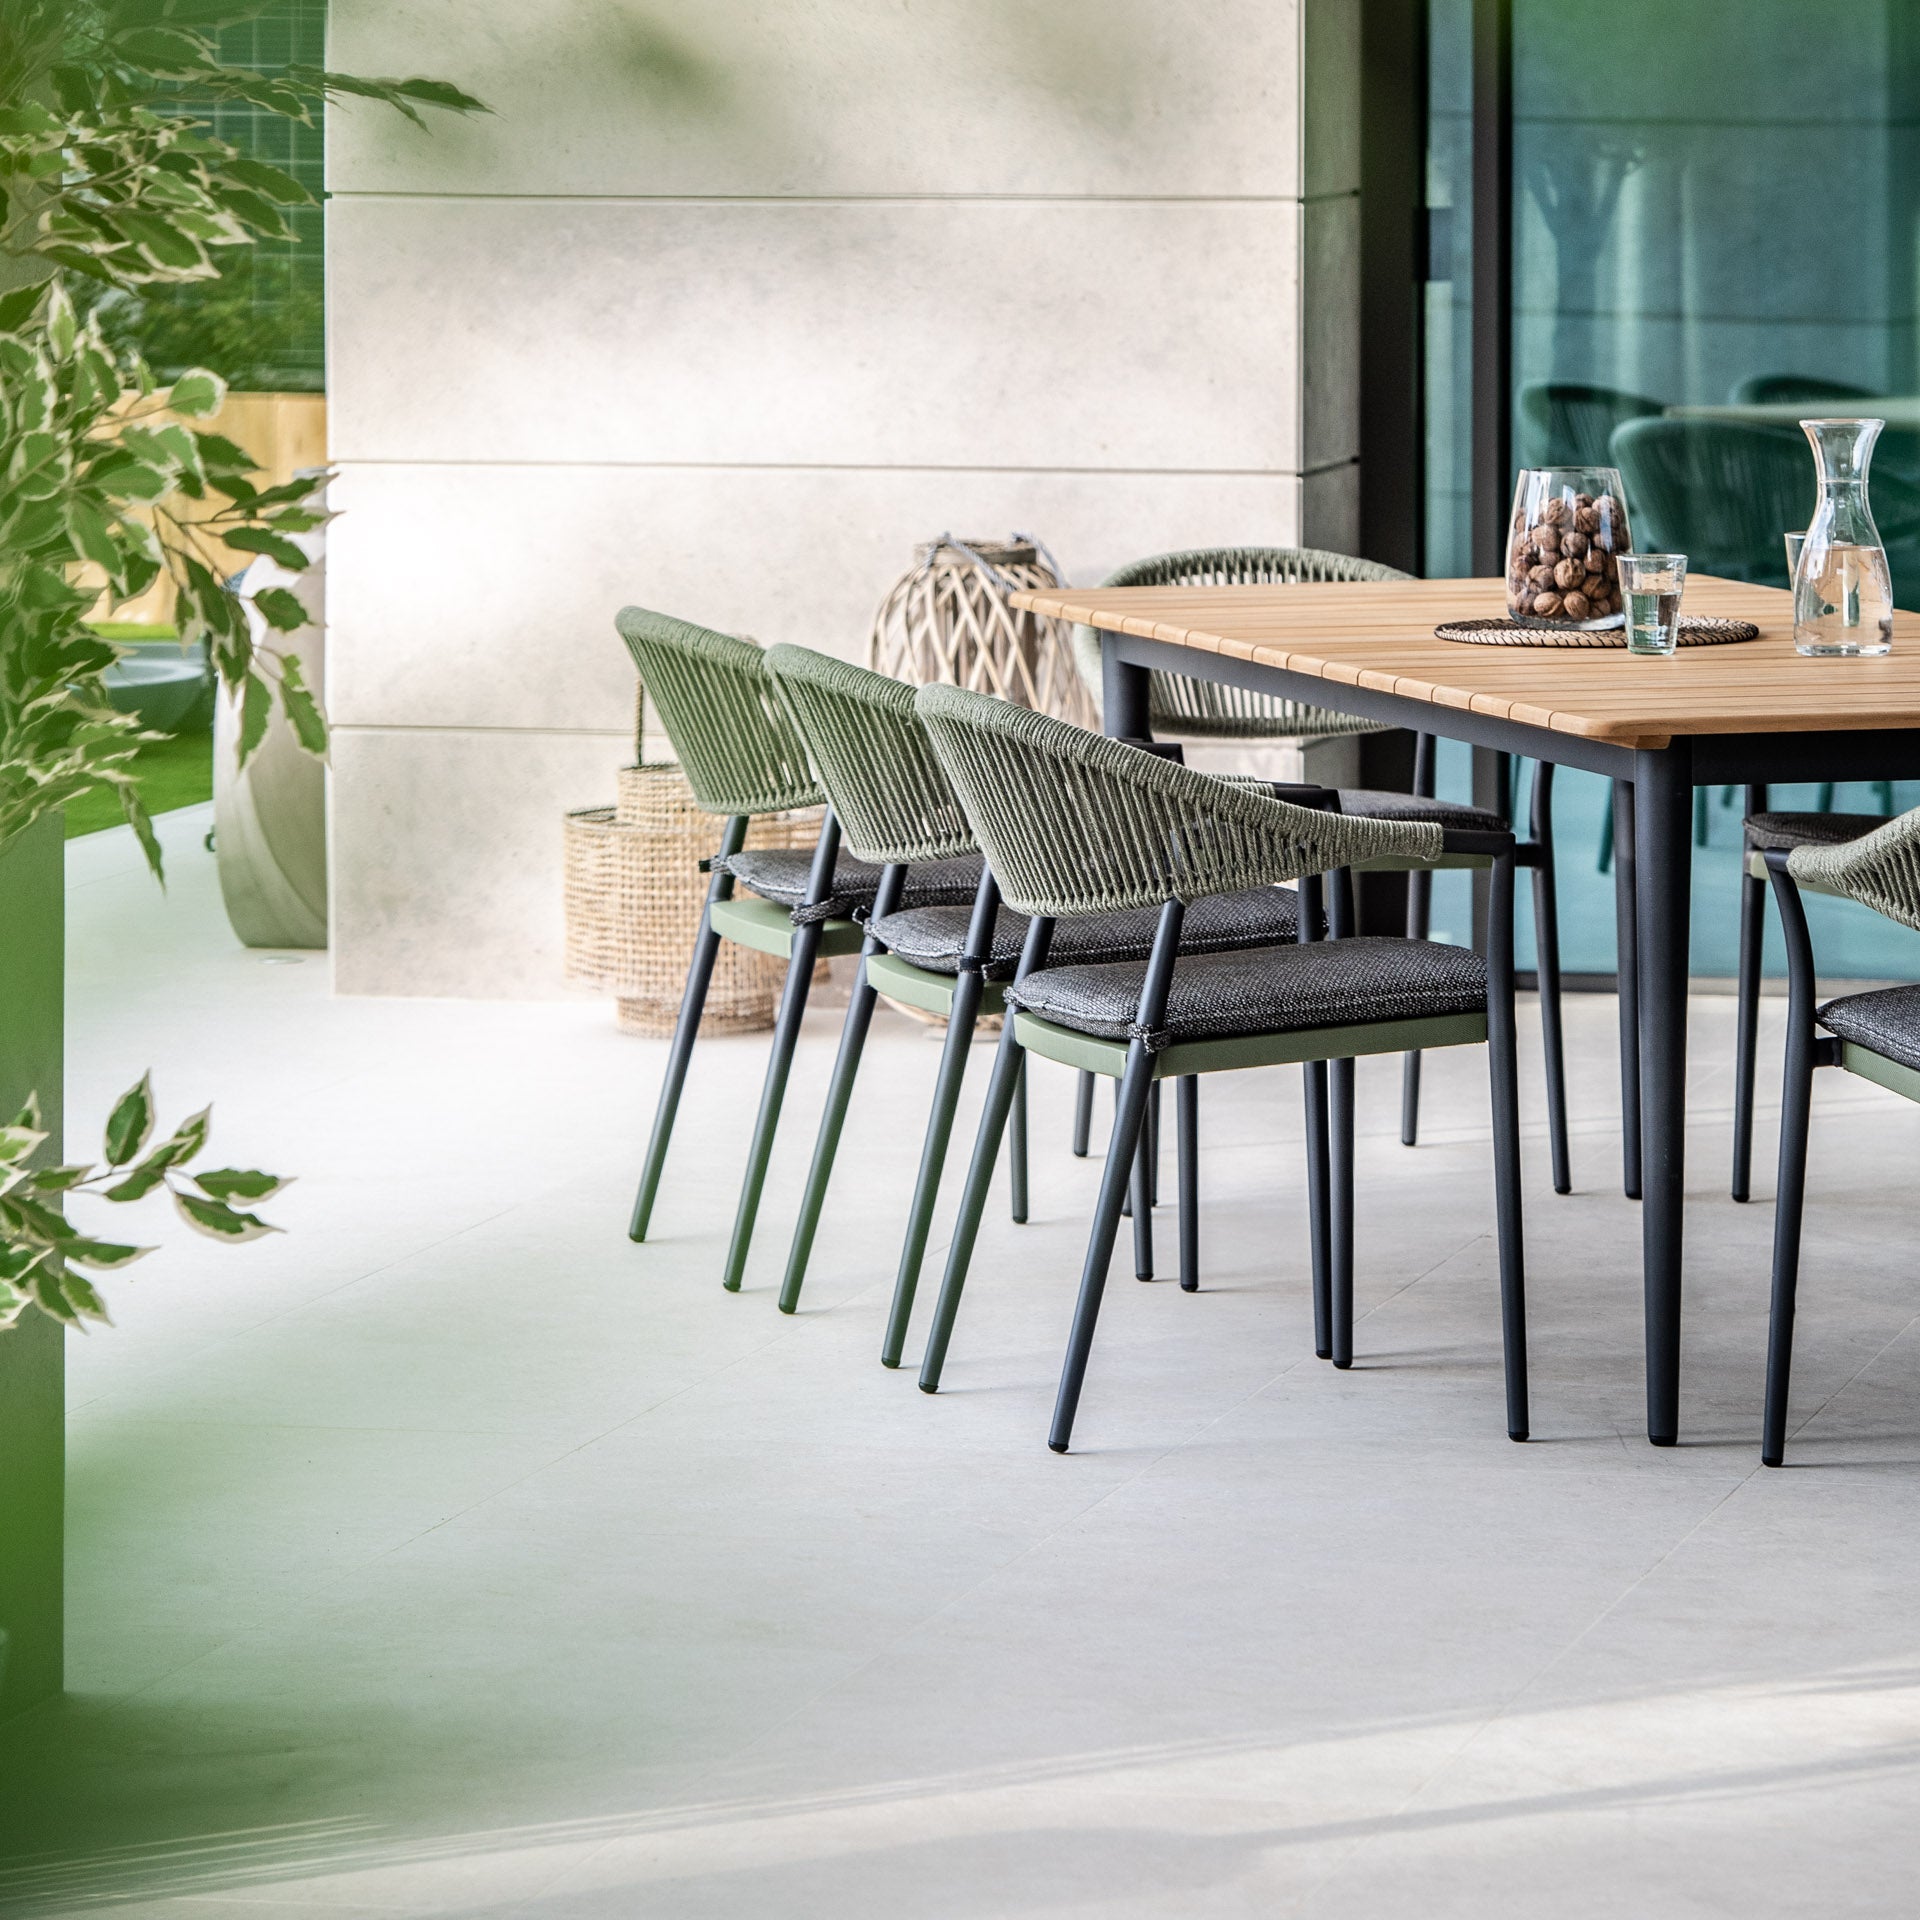 Cloverly 8 Seat Rectangular Dining with Teak Table in Olive Green